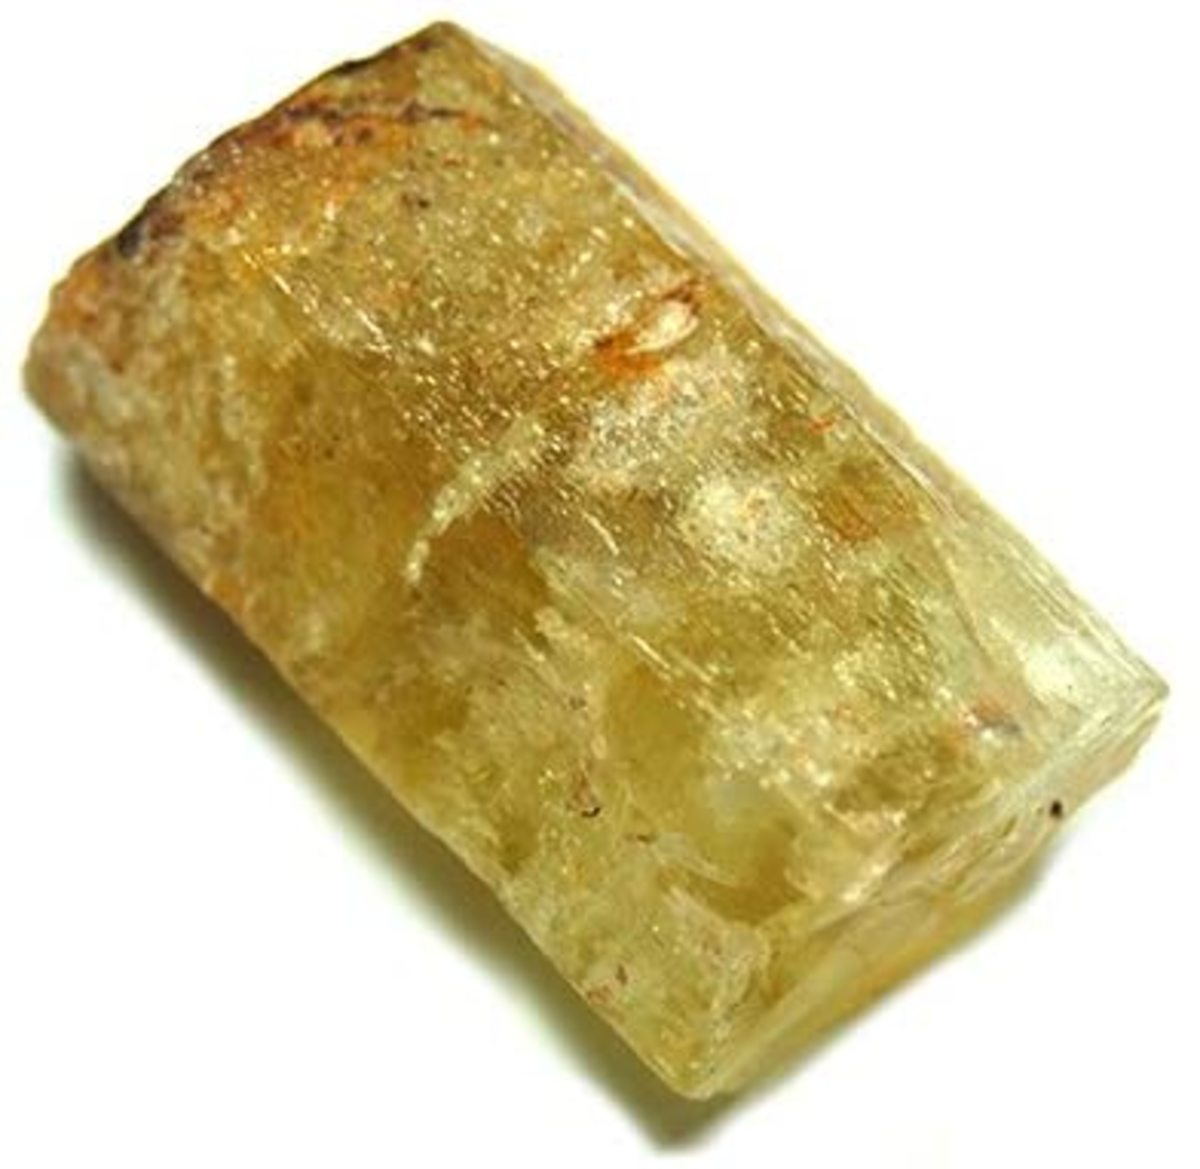 Beryl is unique in that reflecting with this stone can help guide you in the right direction in your life. This is why it is popular for use in scrying.